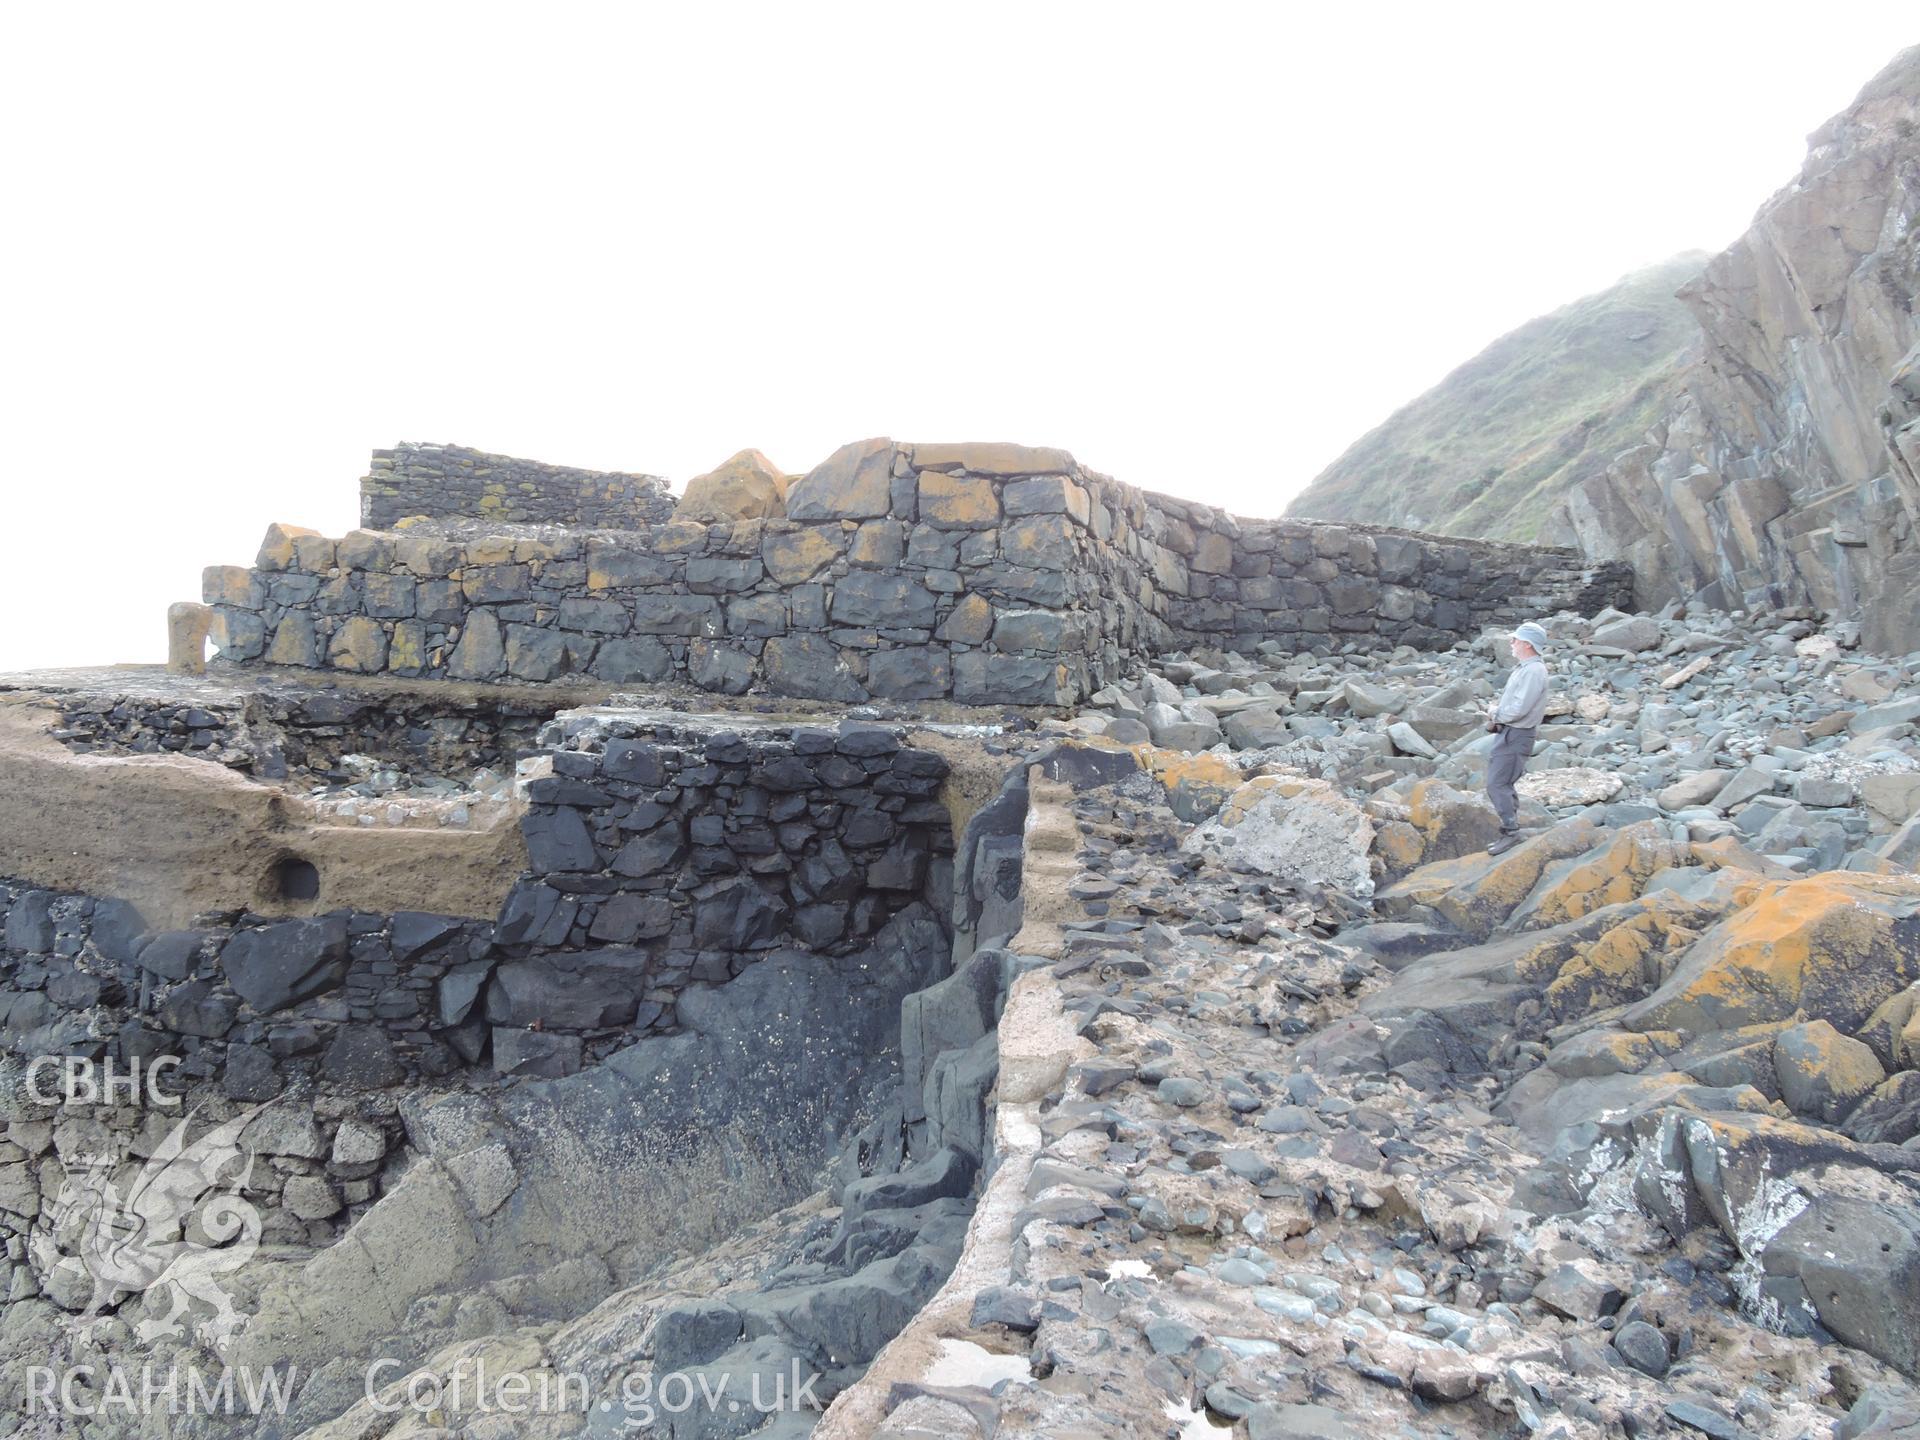 View of the wall at the quay, with human for scale. Part of a digital photographic survey of Porth y Pistyll, Aberdaron, produced in 2020 by Michael Statham.